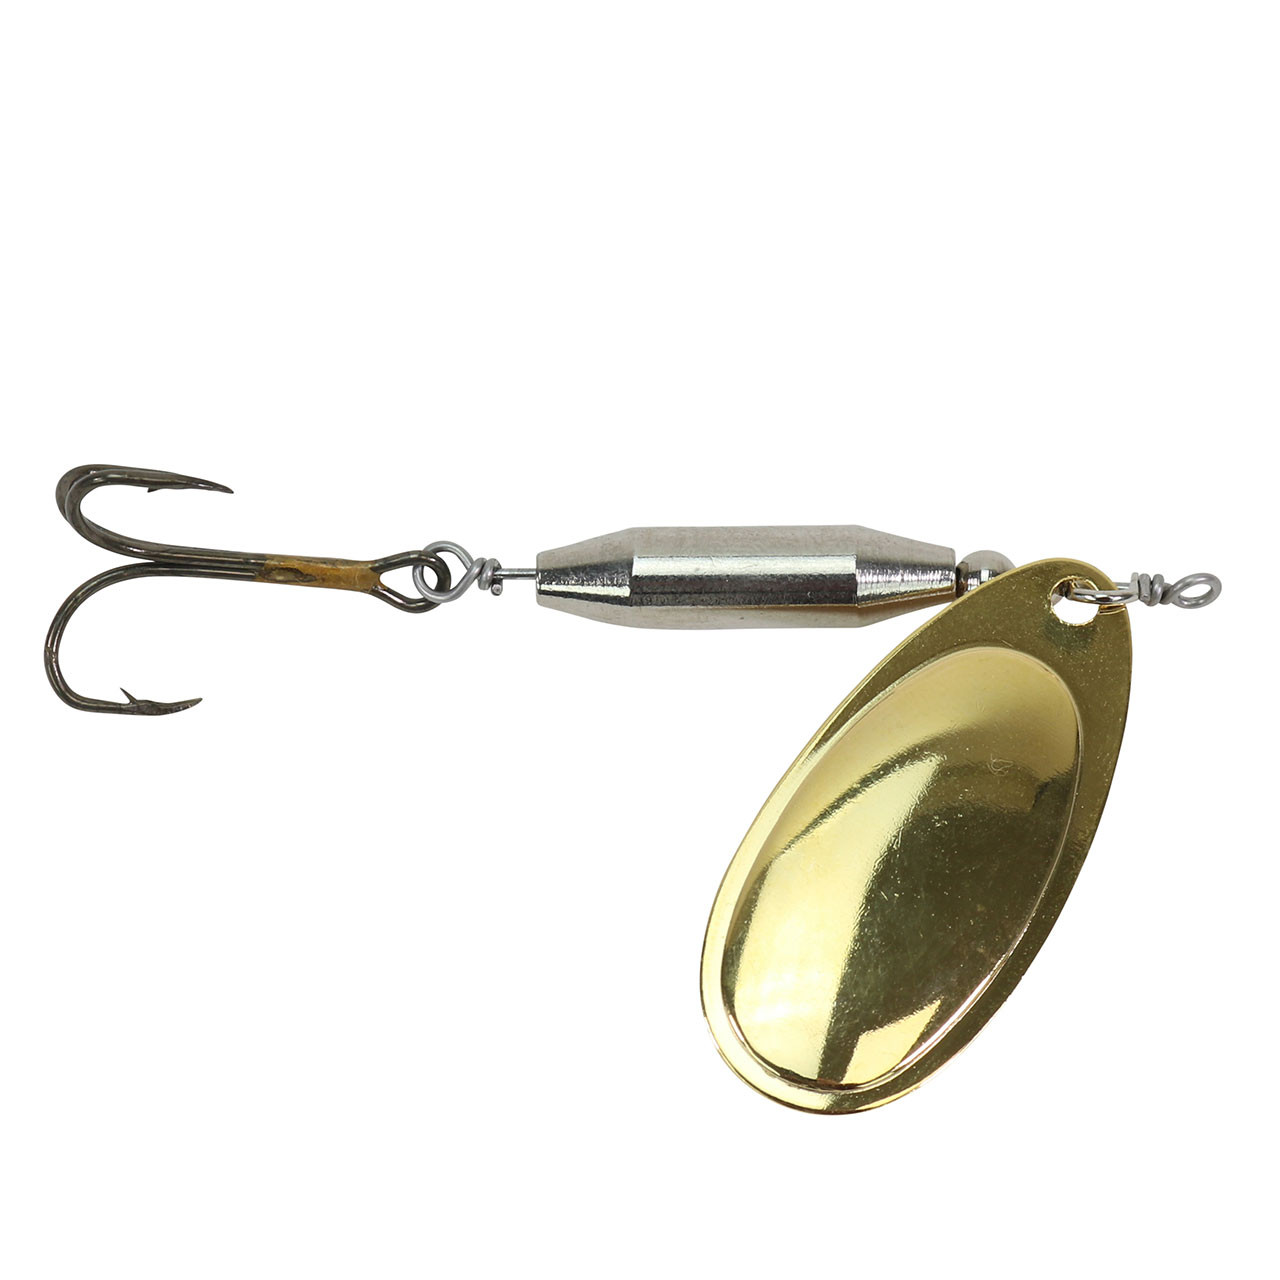 Salmon Steelhead Fishing Spinners for trolling or casting.